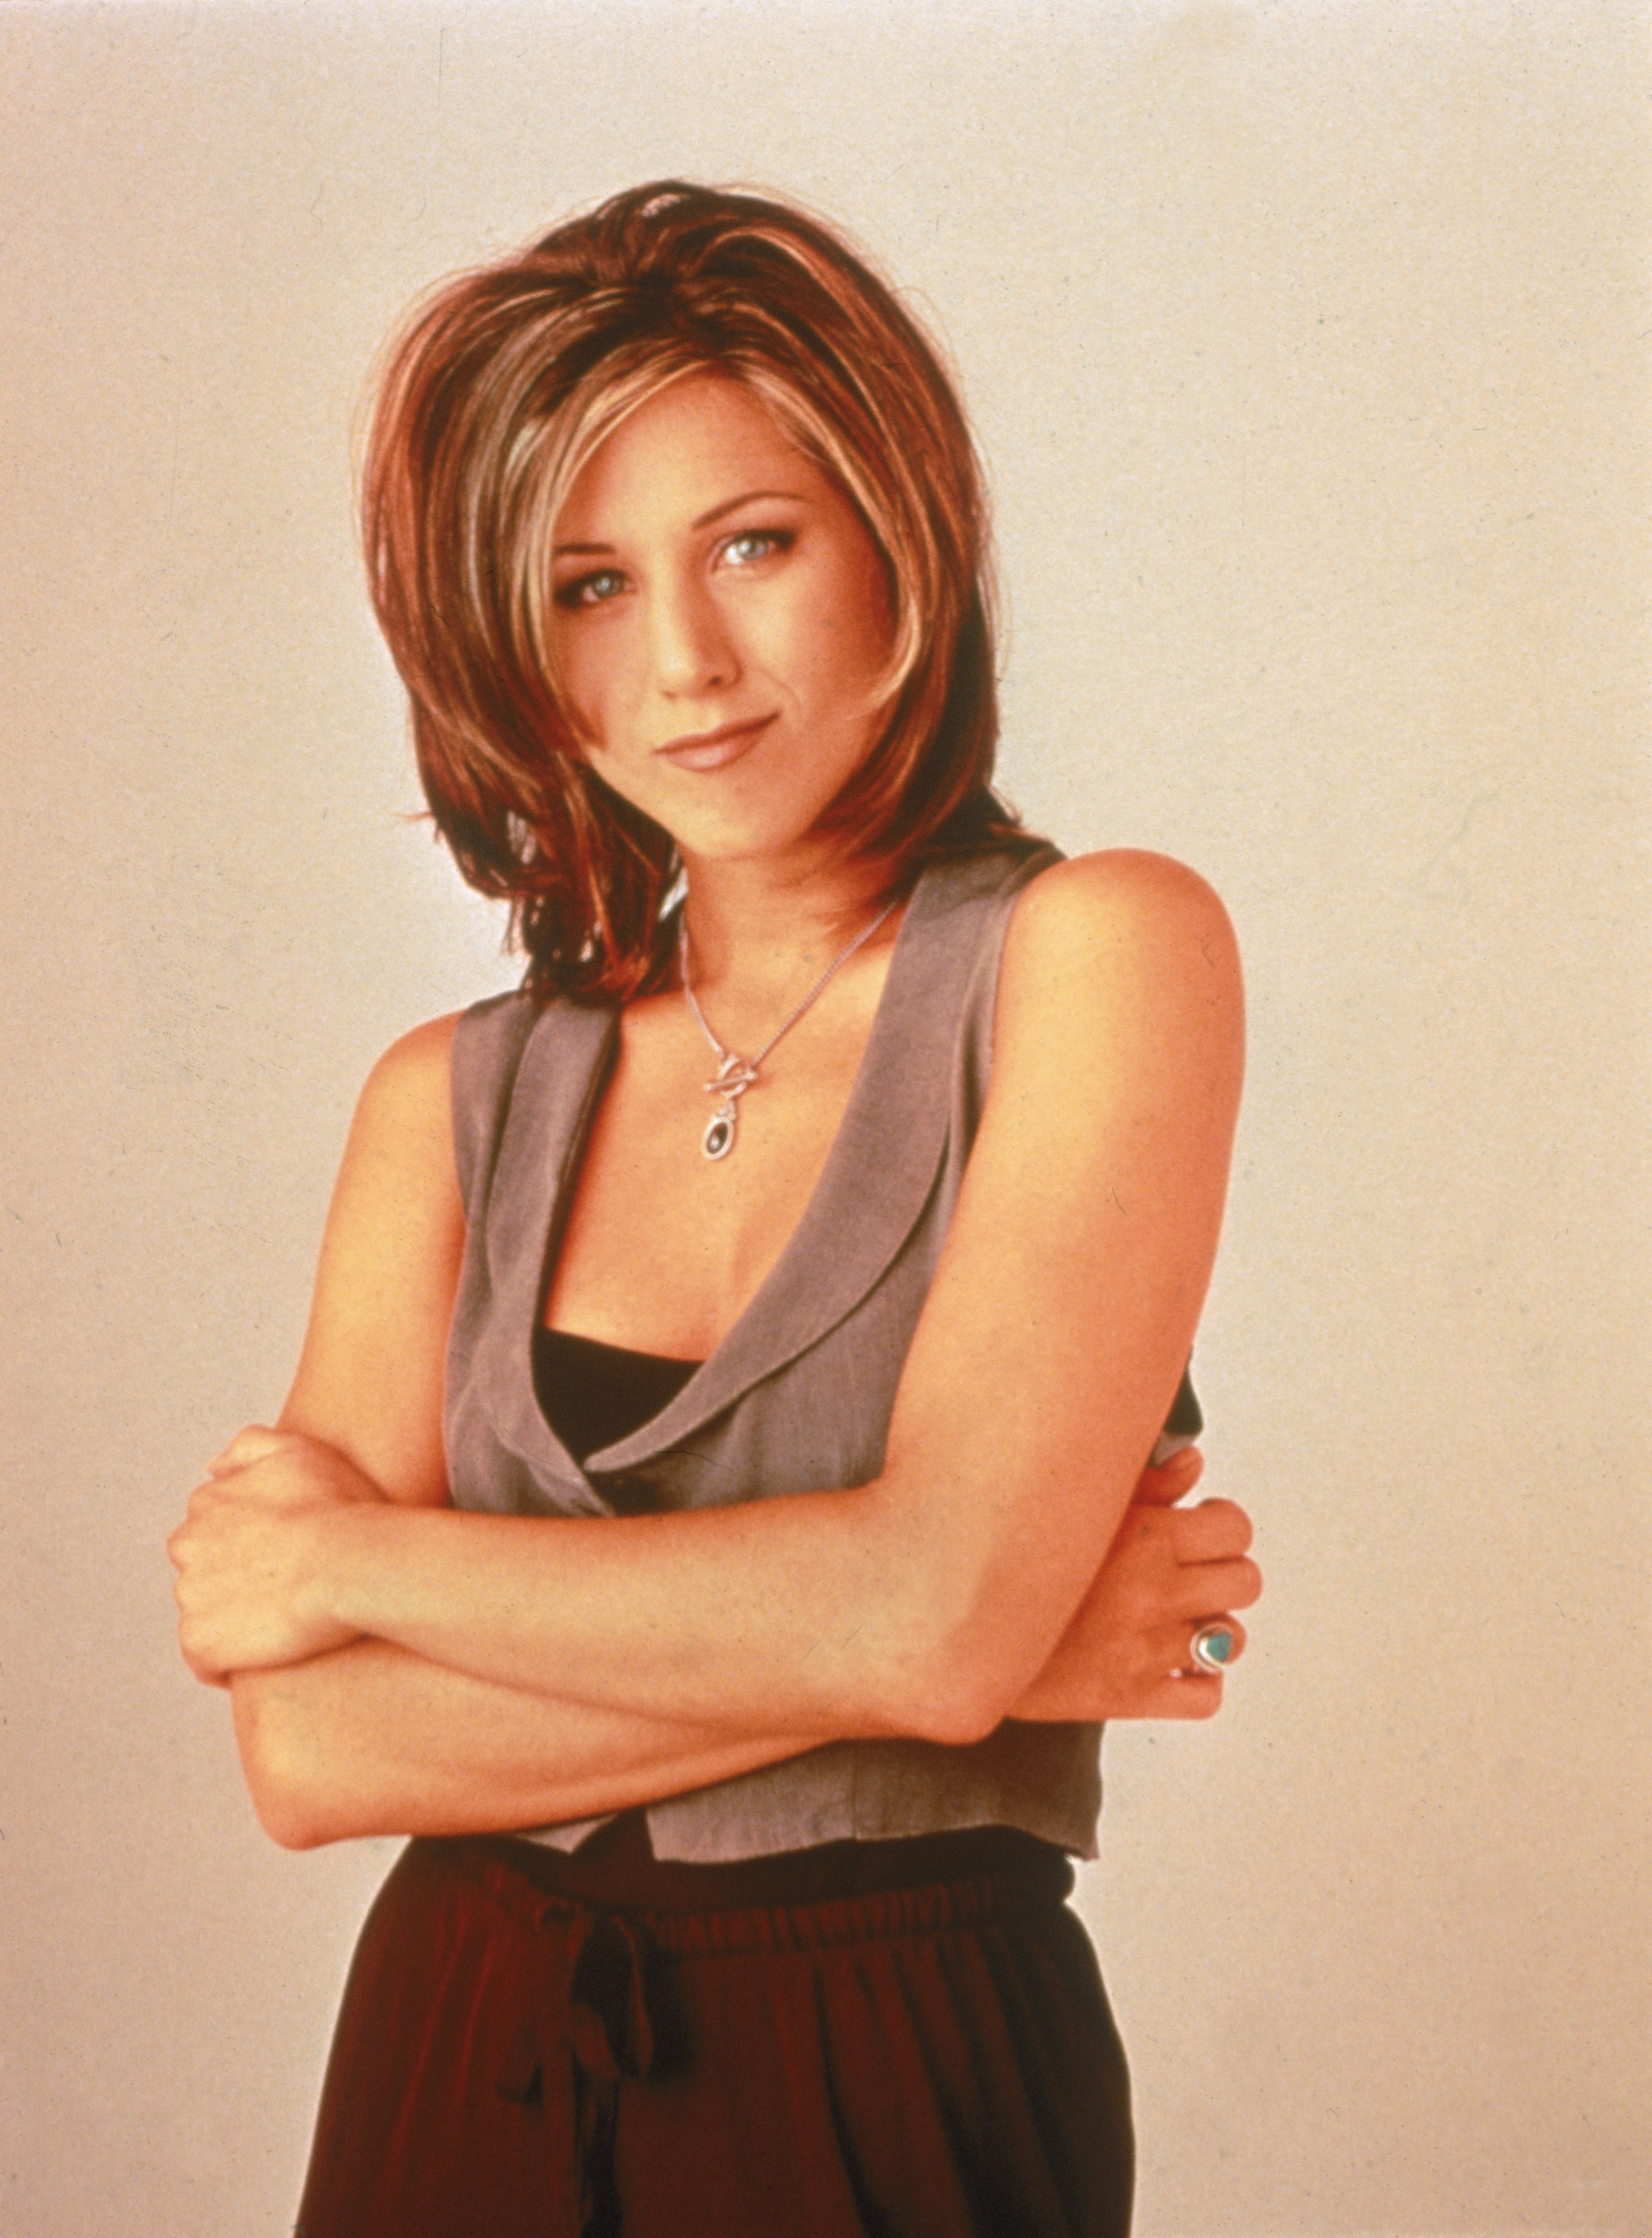 (Photo: NBC Television/Getty Images) Promotional portrait of American actor Jennifer Aniston for the television series, 'Friends,' c. 1995